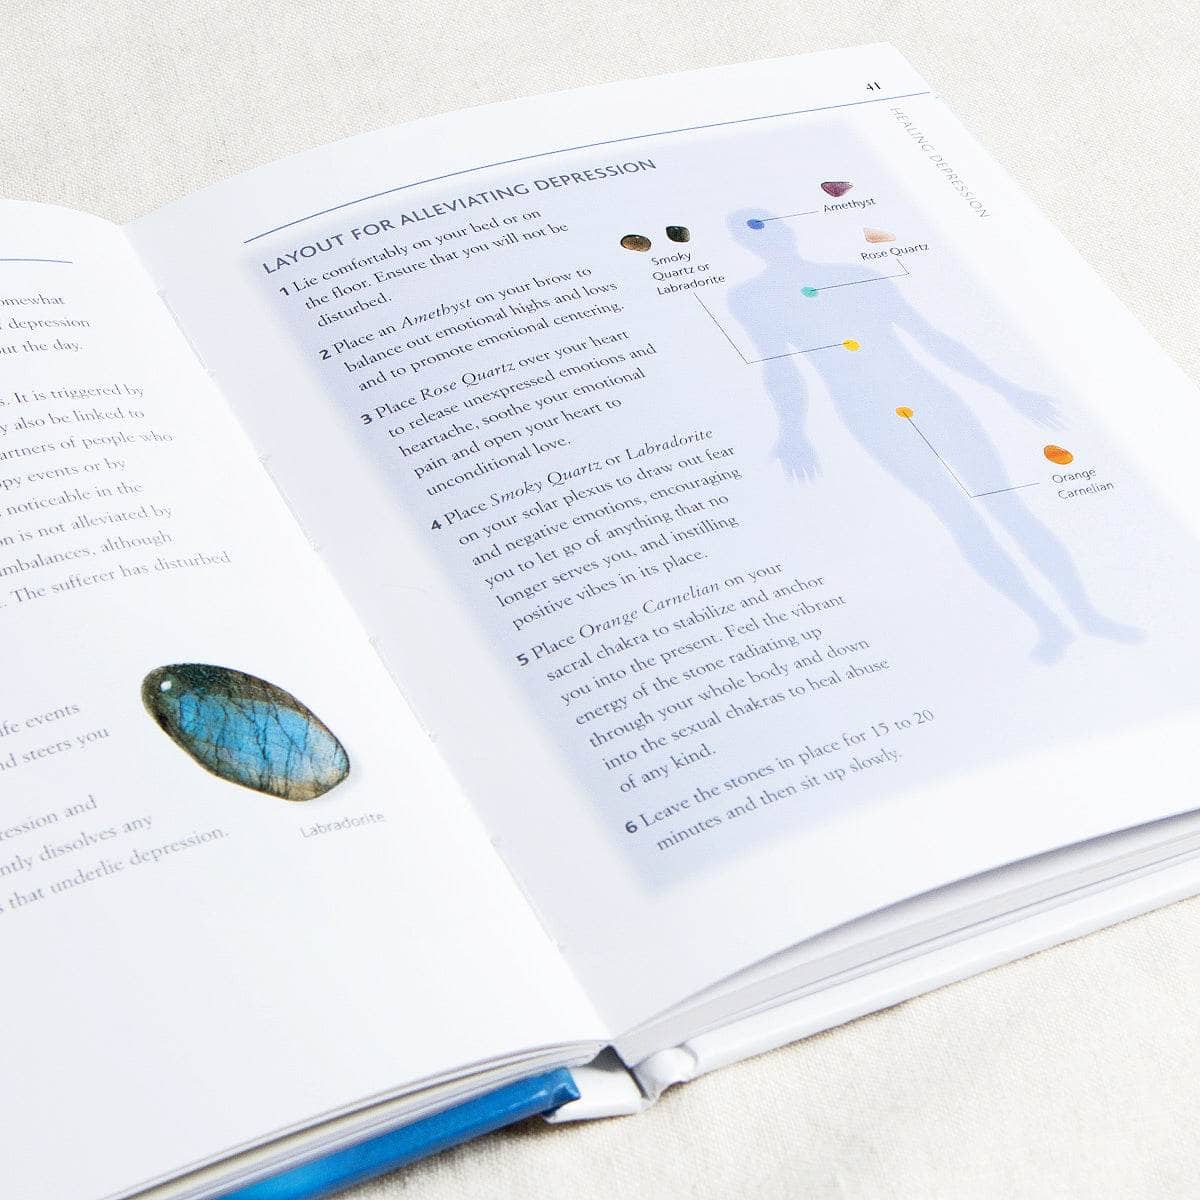 Crystal Healing Book by Tiny Rituals